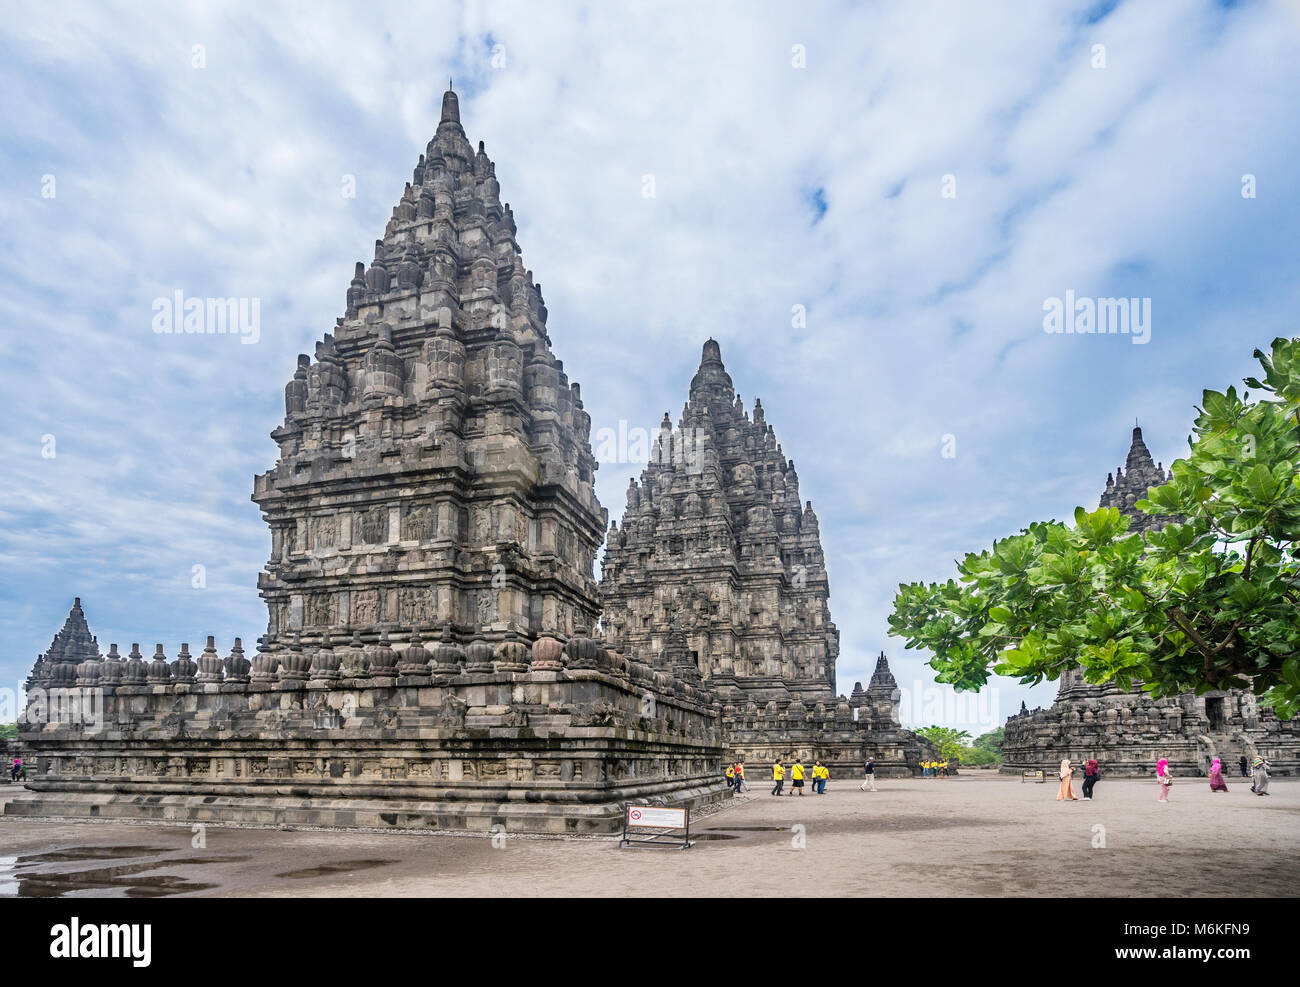 Indonesia, Central Java, mid-9th century Prambanan Hindu Temple complex, in the forground the Vahana temple dedicated to Nandi and the Shiva temple, t Stock Photo